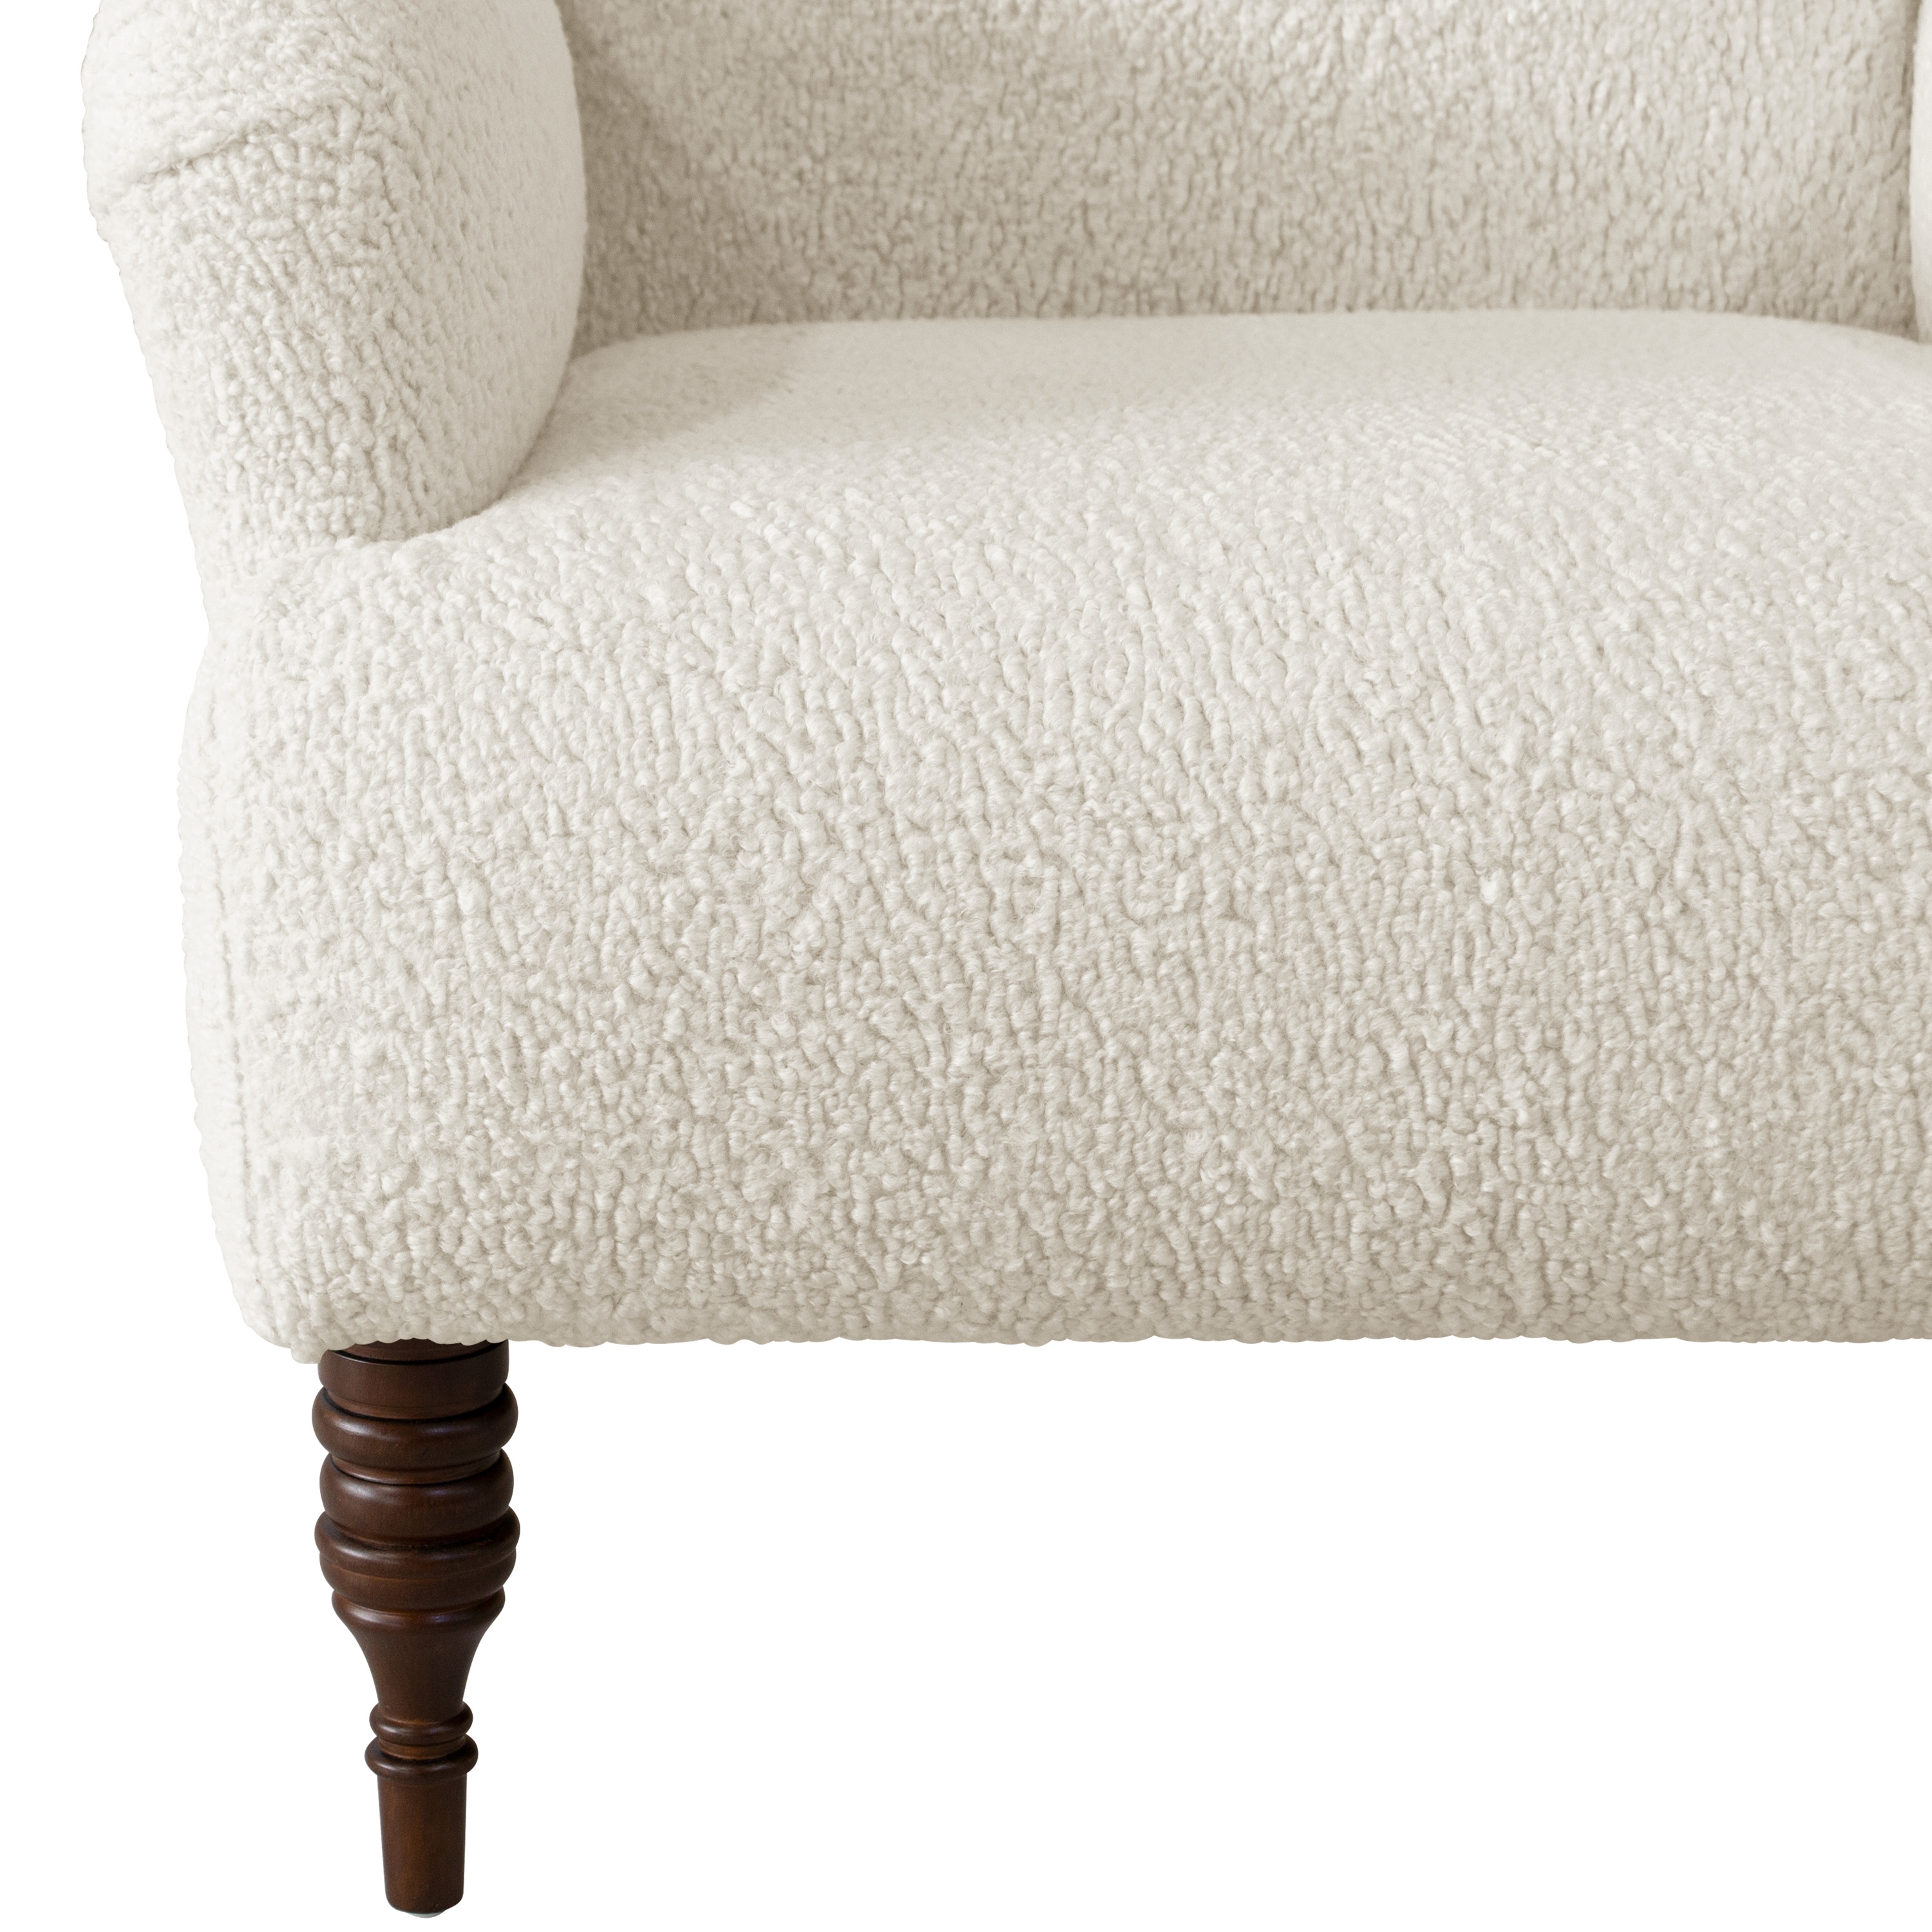 Norwood Chair in Sheepskin Natural - Image 4